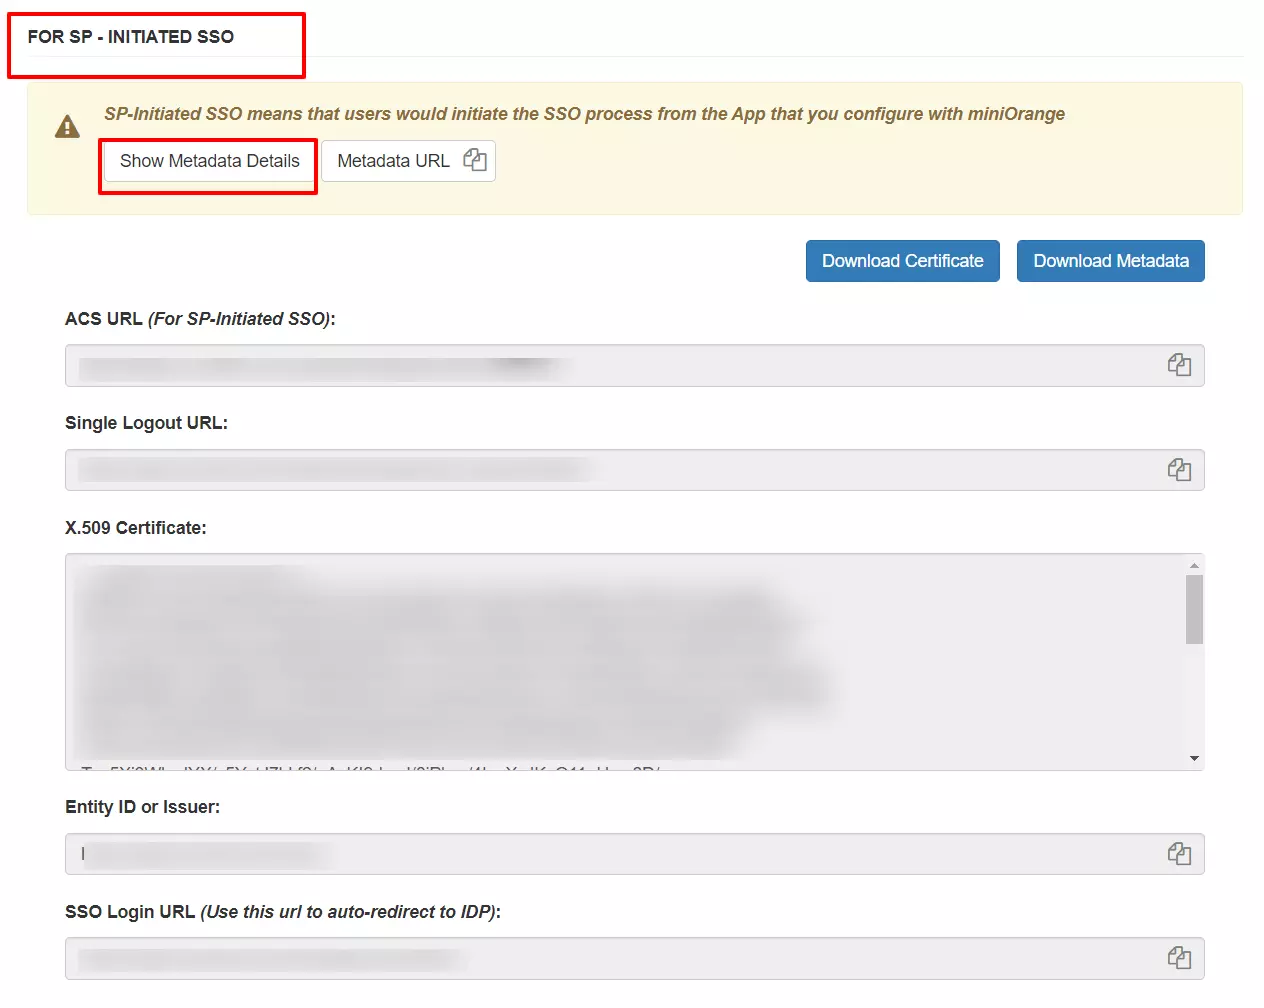 Workday Shopify SSO - Sigle Sign on into SHopify using Workday as IDP - SP Initiated SSO